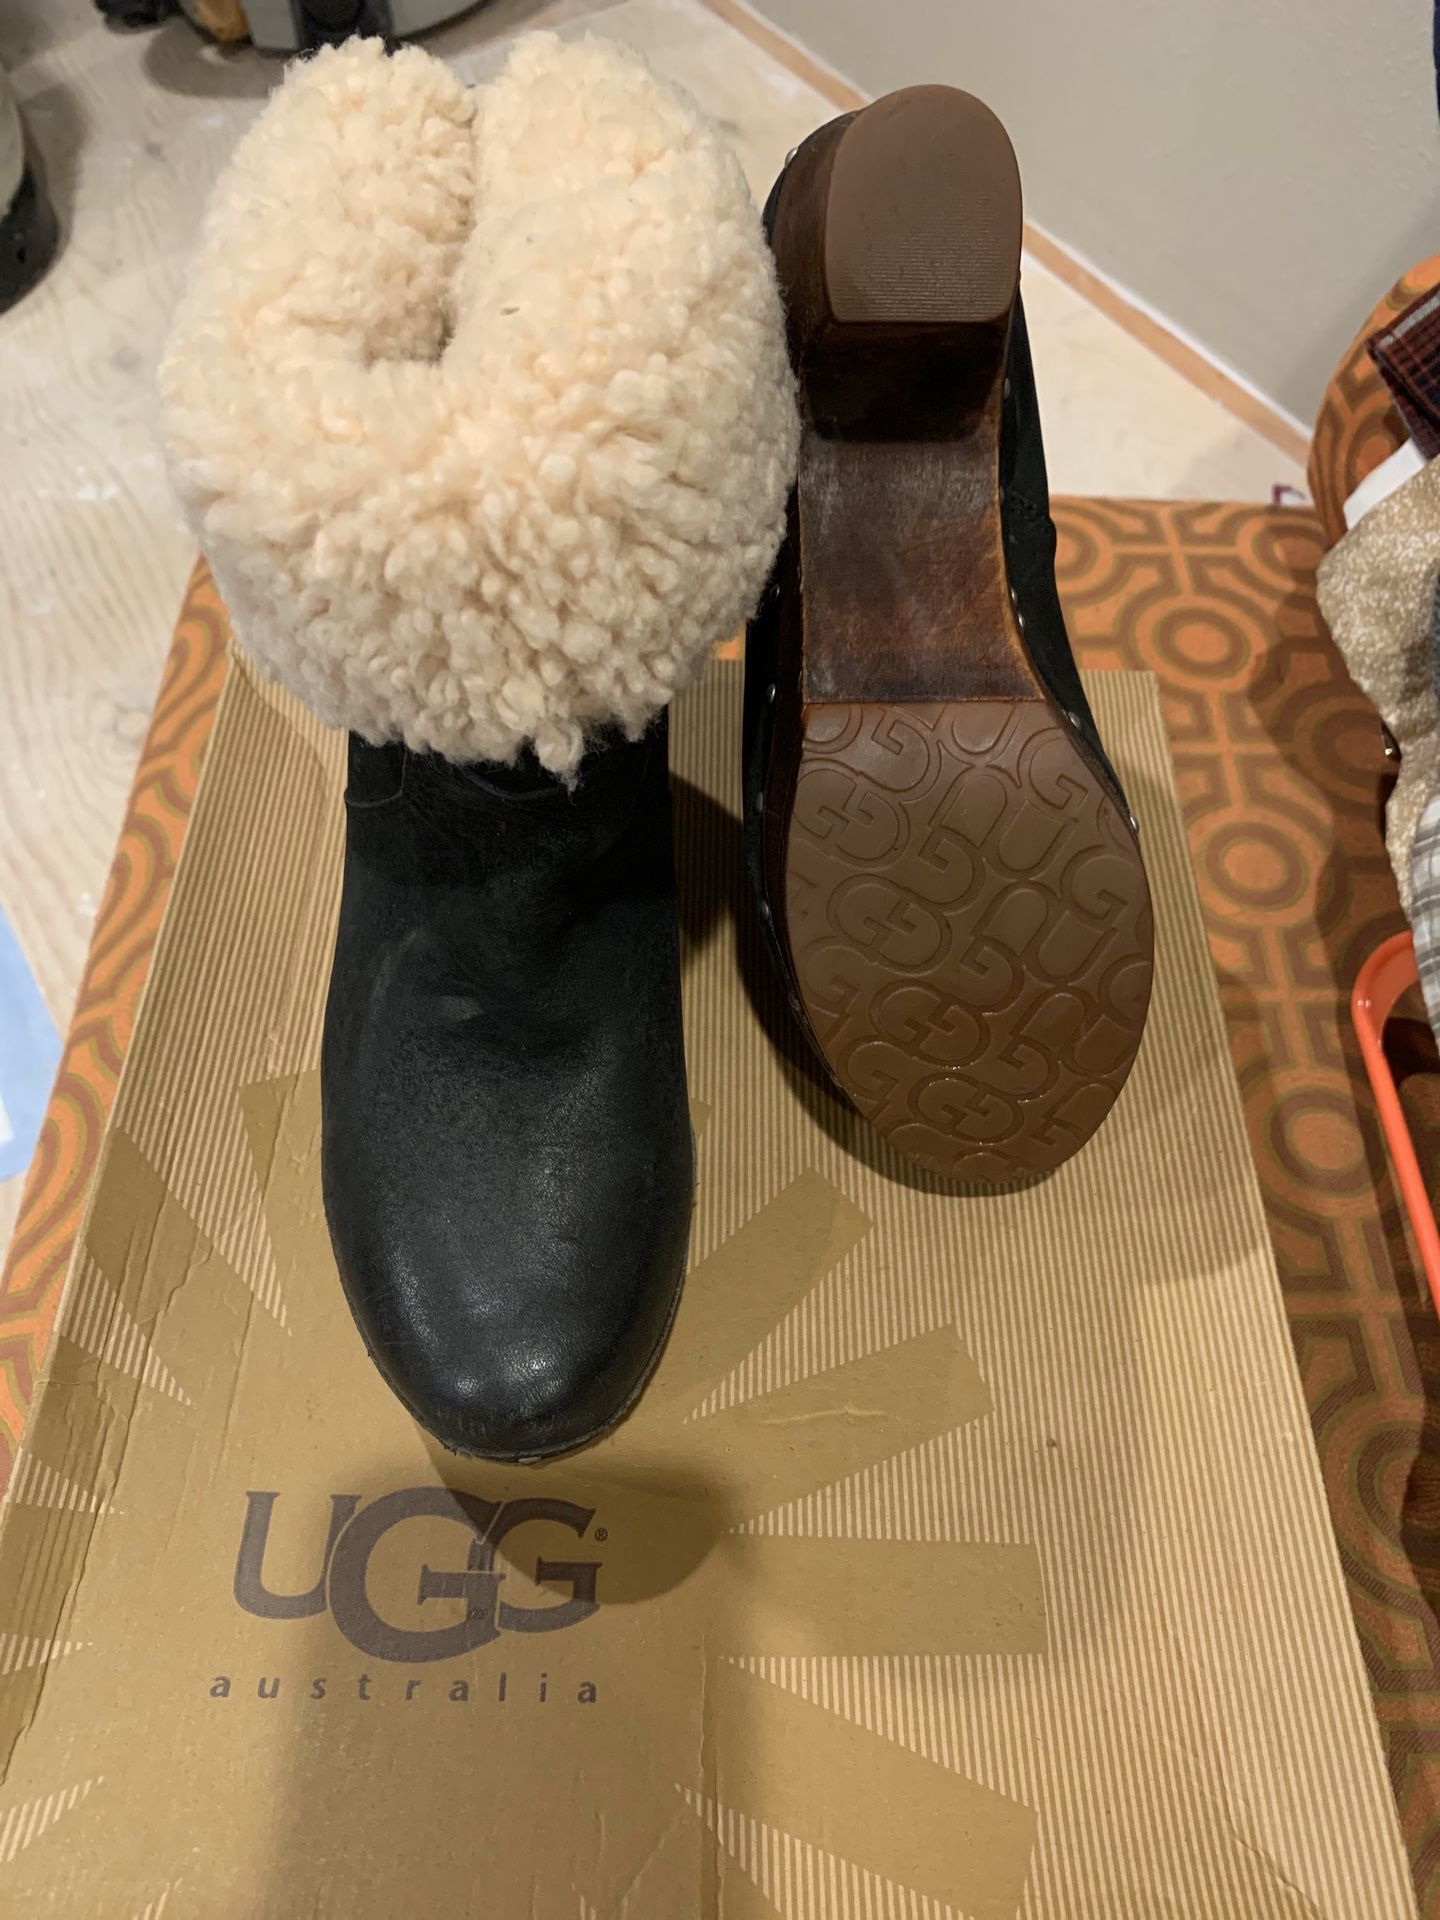 Brand new Ugg Clog Boots size 7